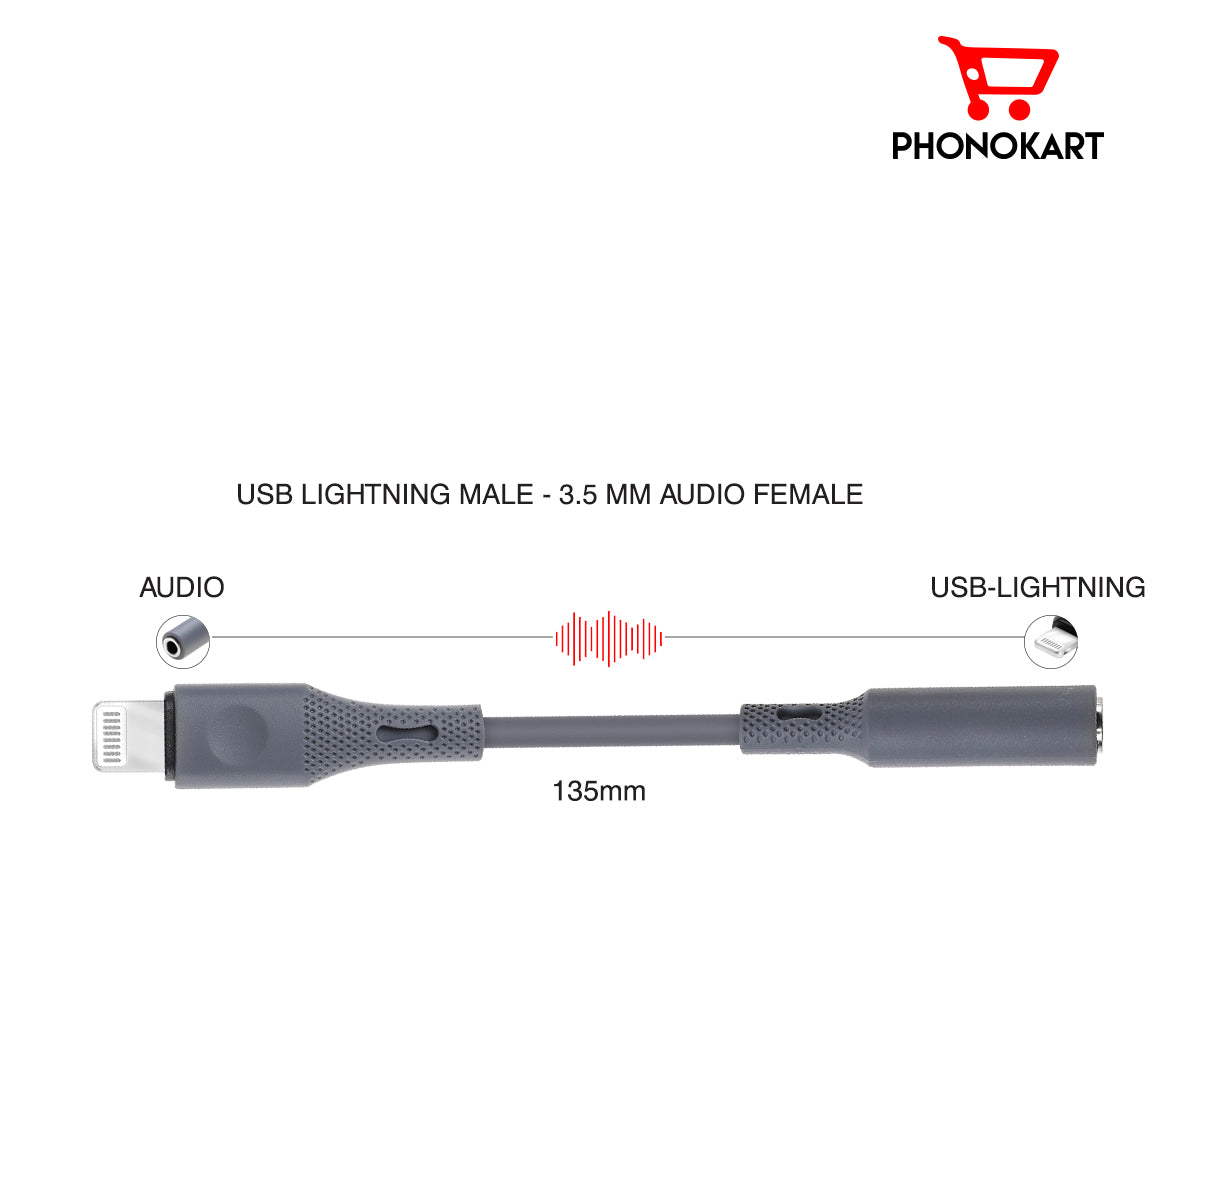 LIGHTNING TO 3.5MM HEADPHONE JACK CONNECTOR (Compatible with Mobile)(GREY)